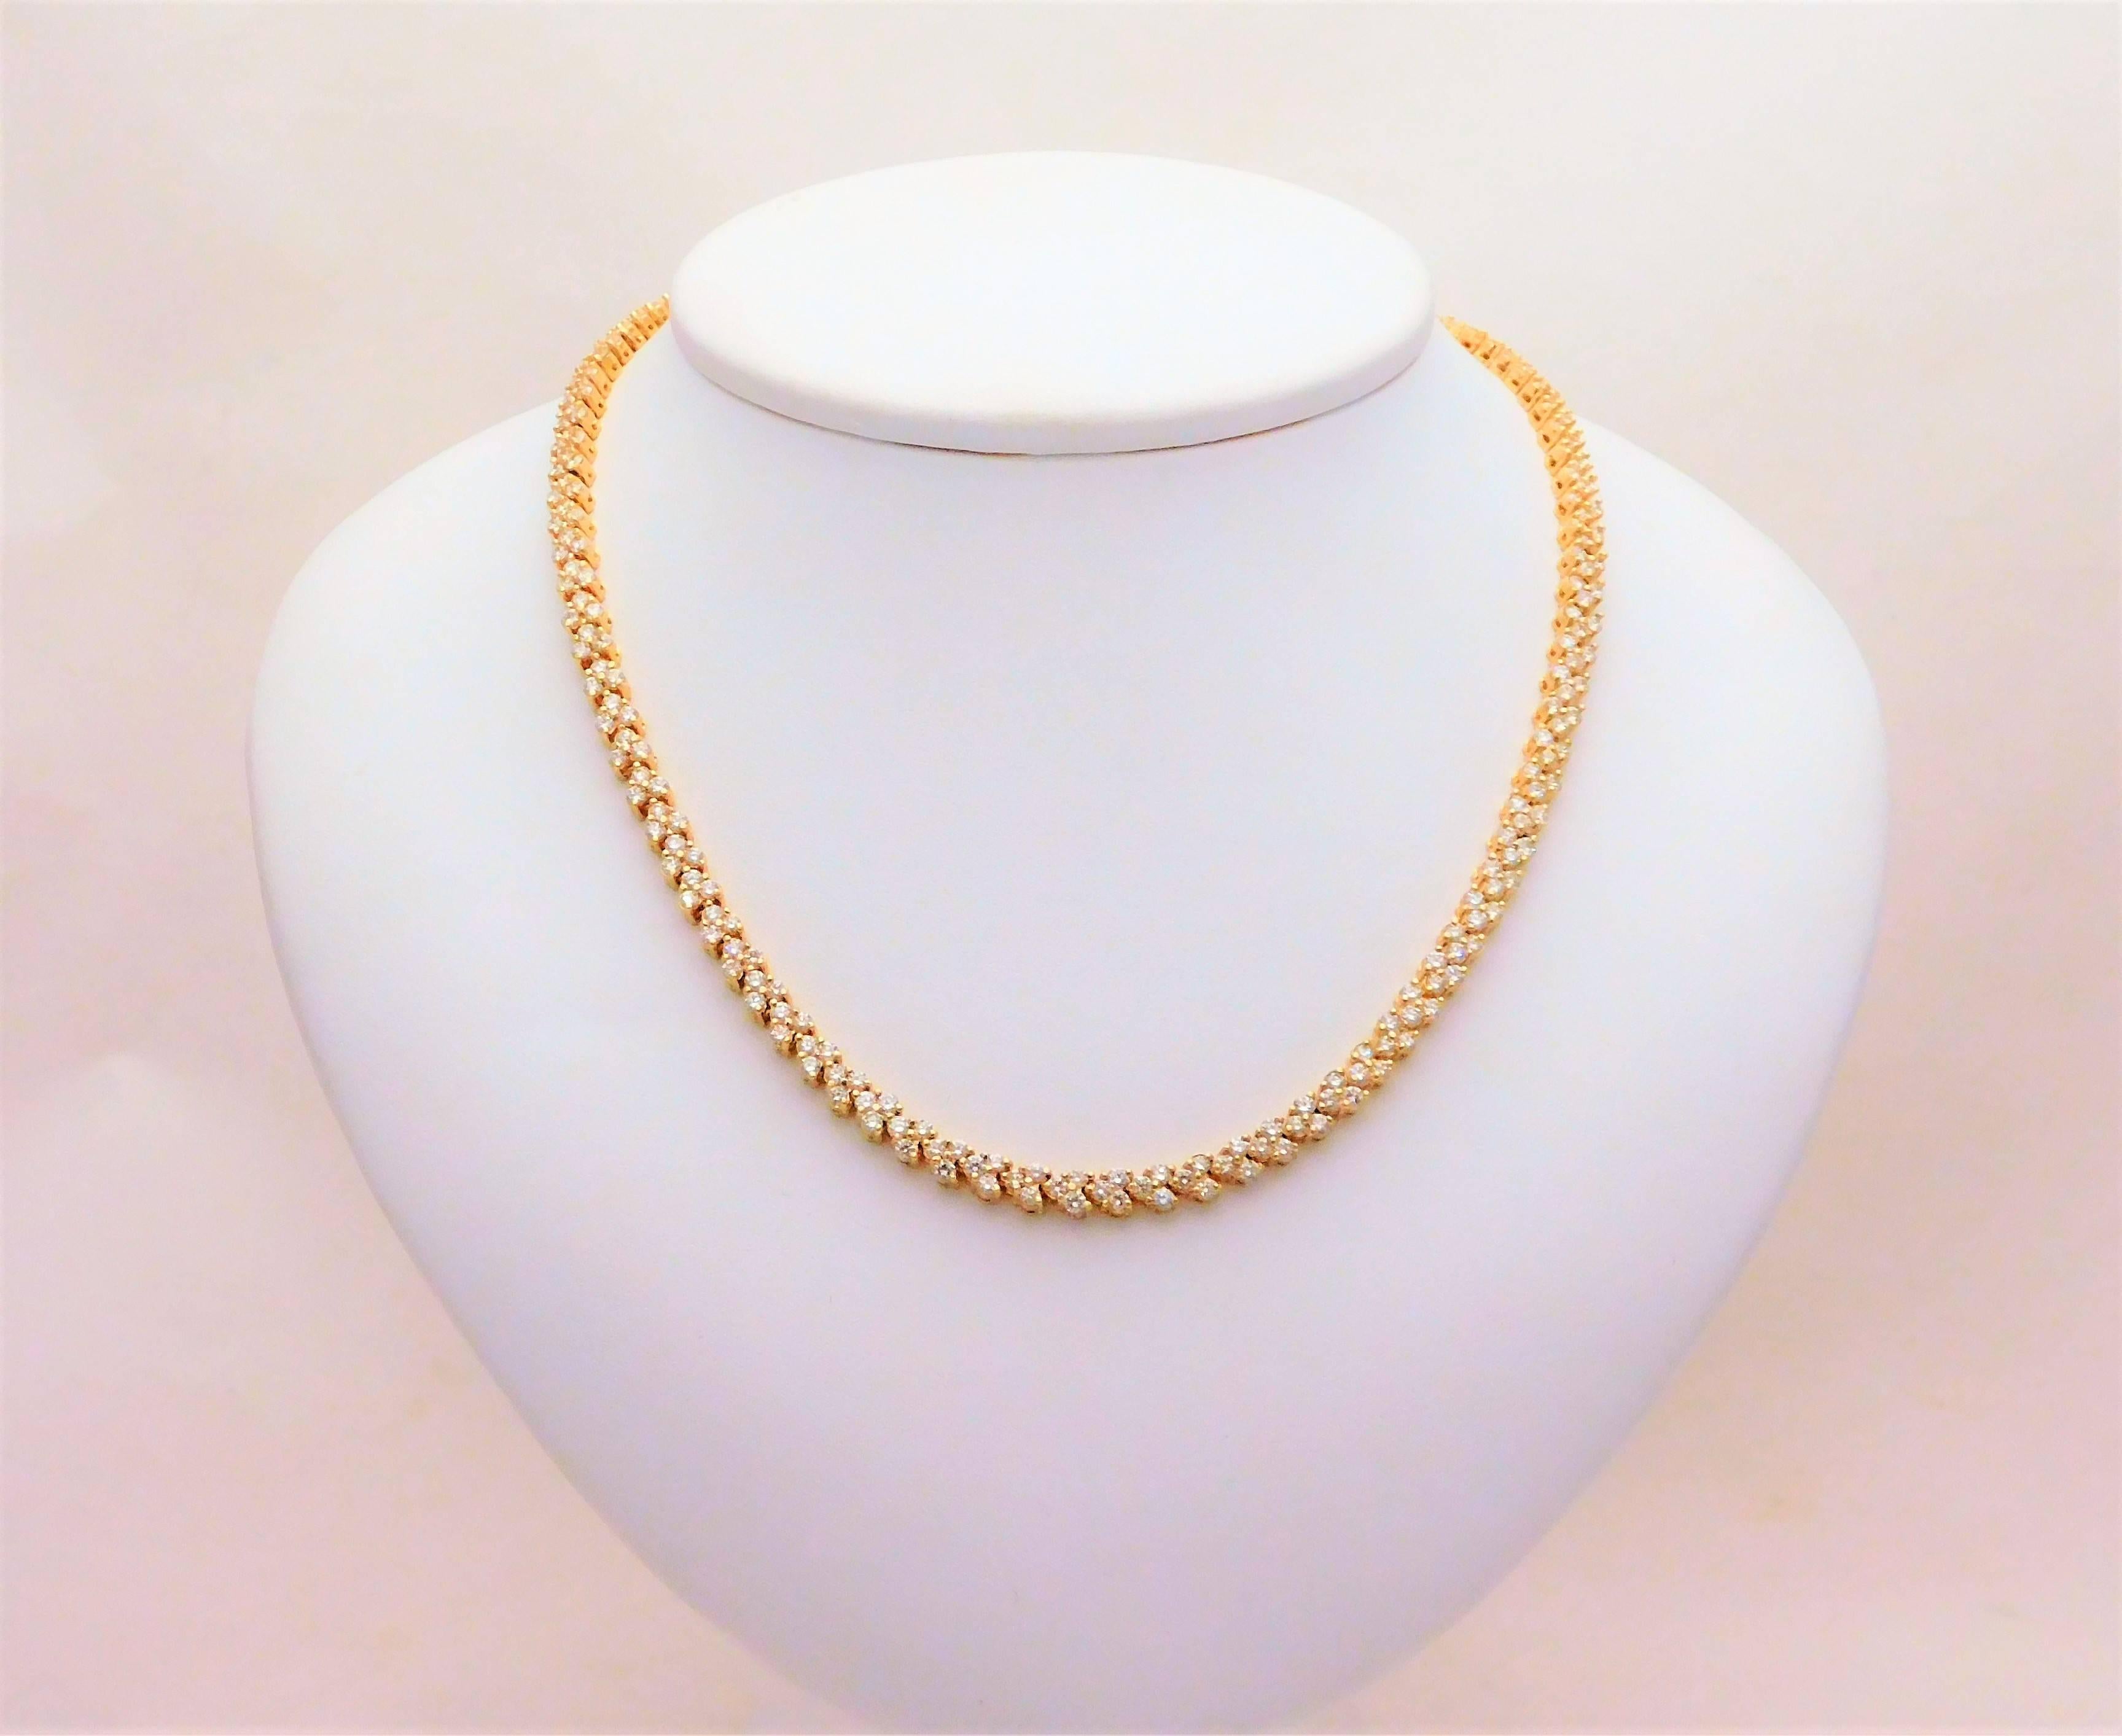 Magnificent Brilliant Diamond yellow Gold Necklace  In Excellent Condition For Sale In Metairie, LA